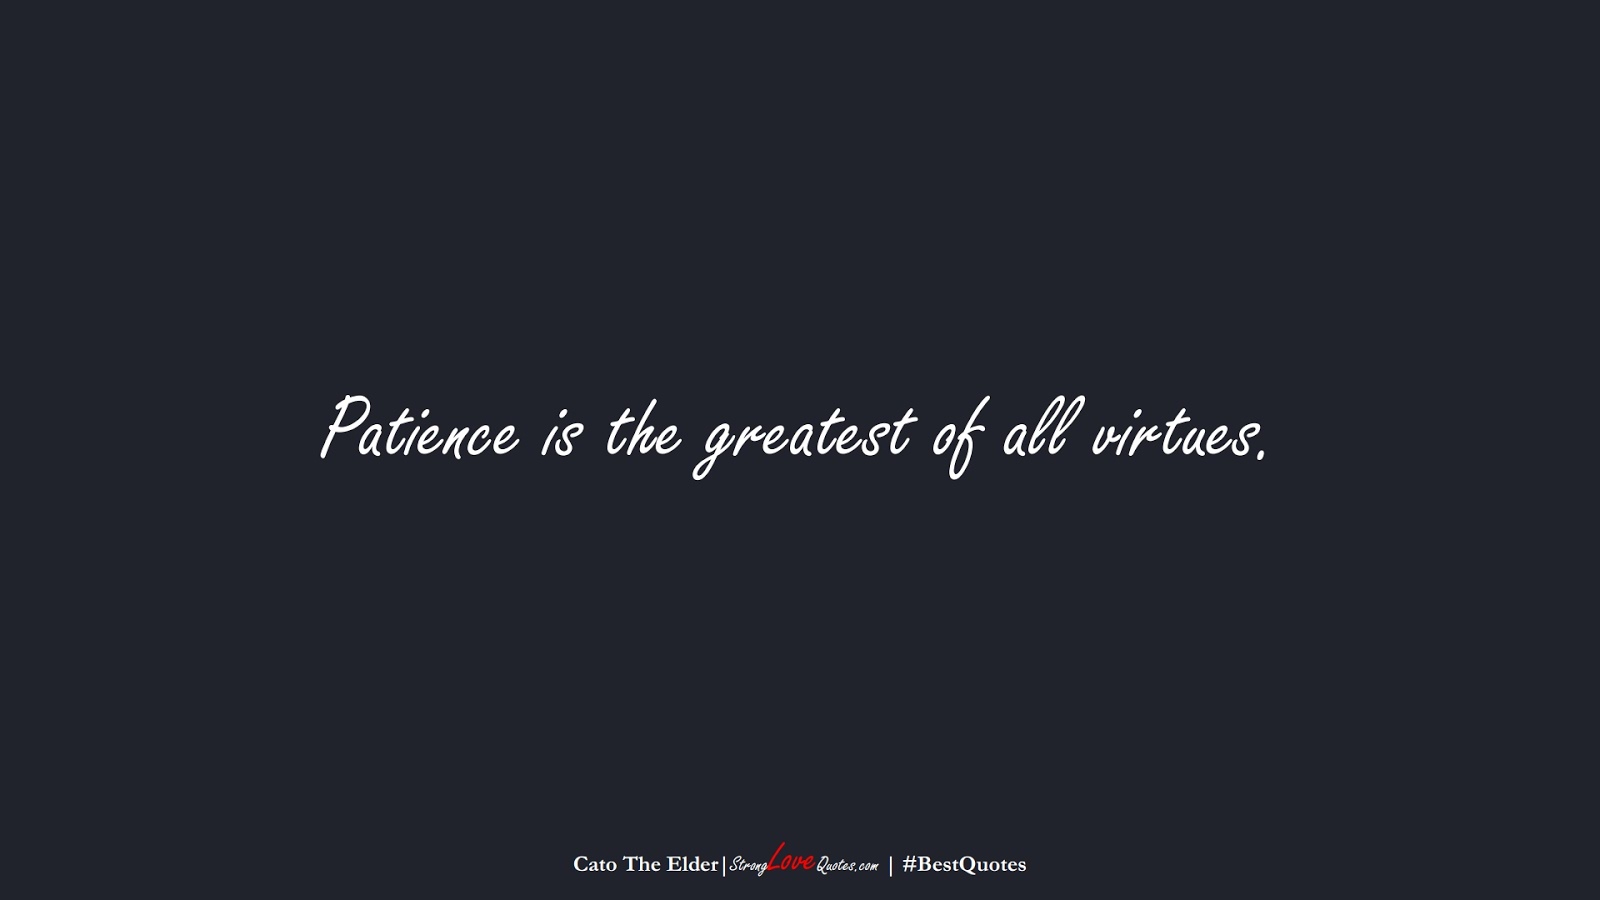 Patience is the greatest of all virtues. (Cato The Elder);  #BestQuotes